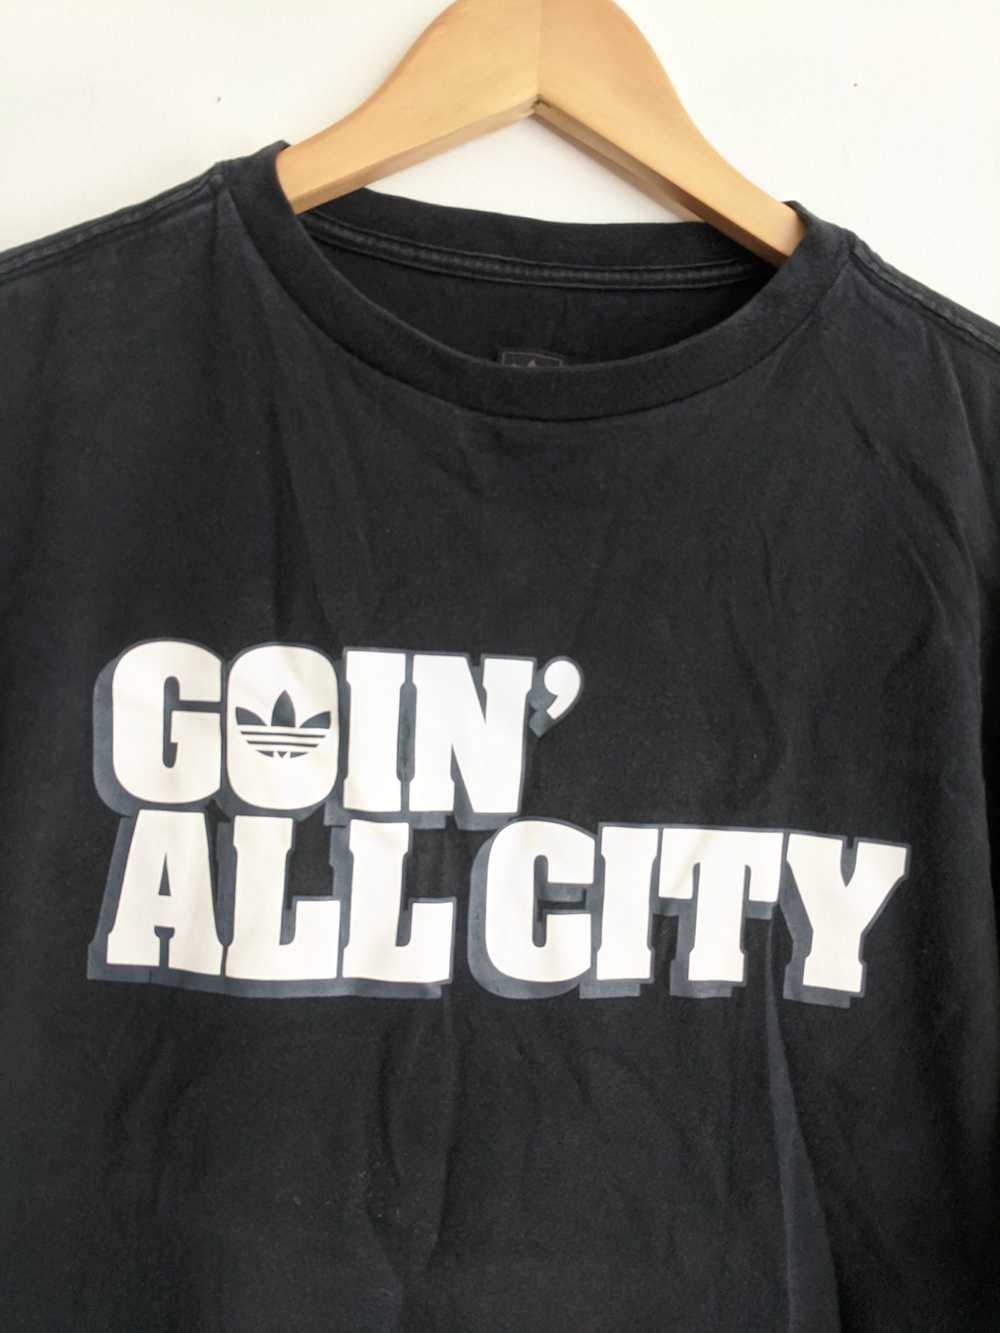 Adidas × Vintage Going all city graphic tee shirt… - image 2